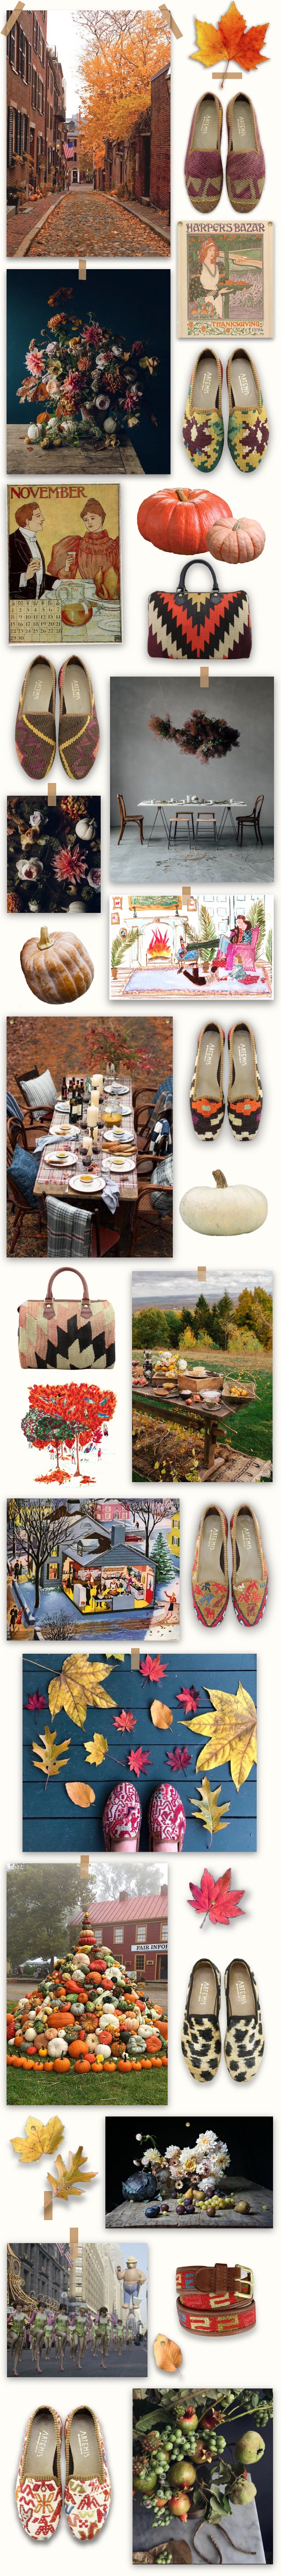 Our November mood board is made up of images that inspire us and pairs of our kilim shoes that we love.